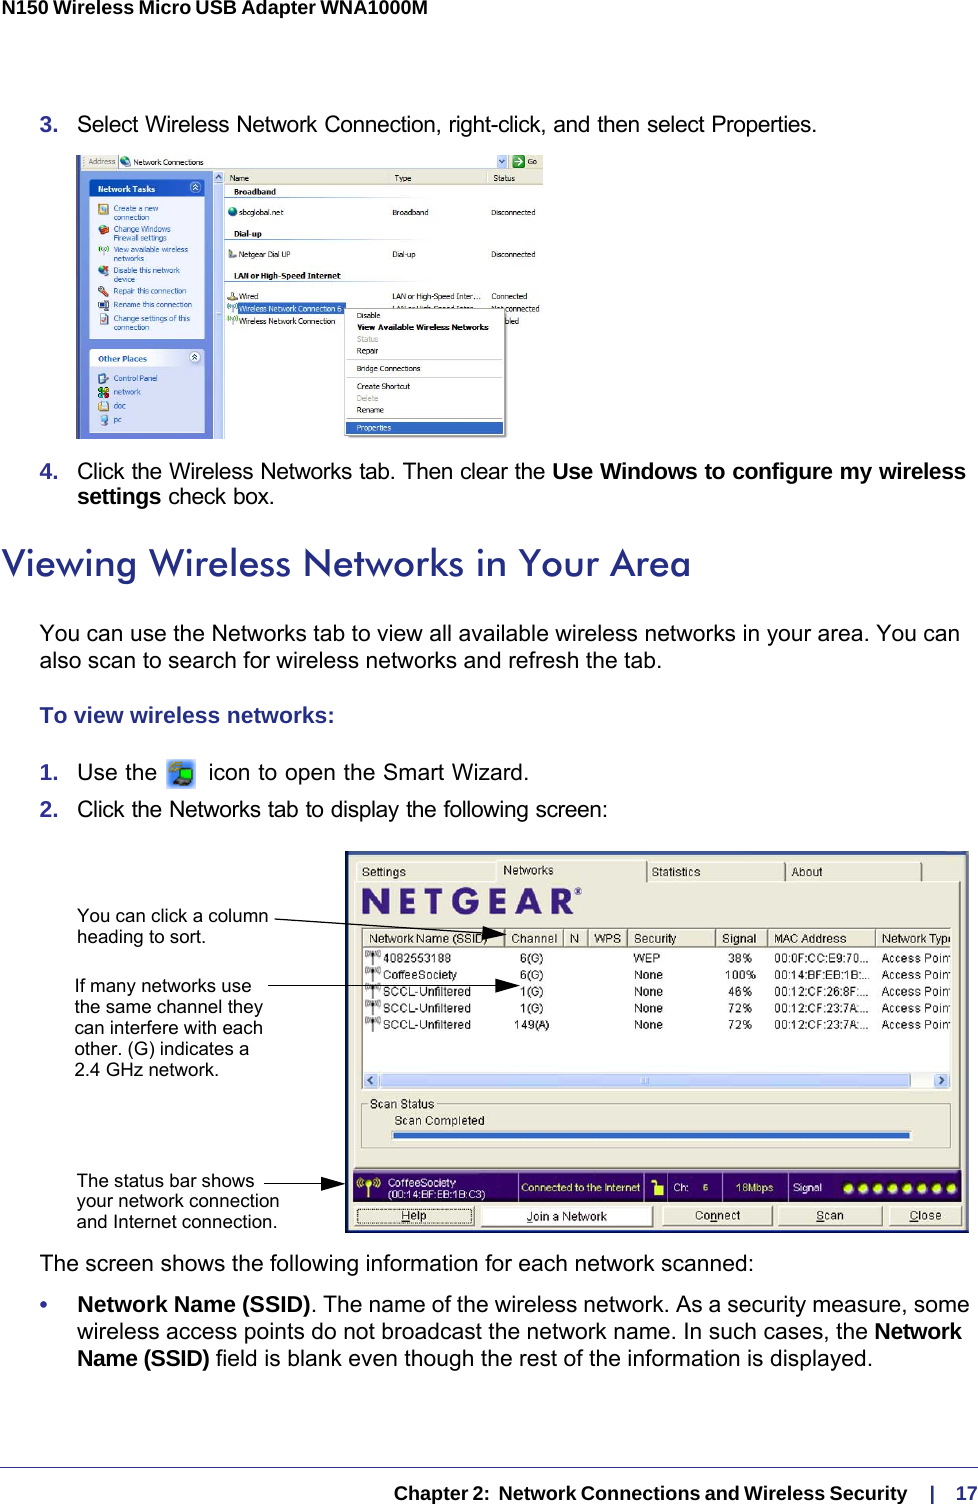   Chapter 2:  Network Connections and Wireless Security     |    17N150 Wireless Micro USB Adapter WNA1000M 3.  Select Wireless Network Connection, right-click, and then select Properties. 4.  Click the Wireless Networks tab. Then clear the Use Windows to configure my wireless settings check box.Viewing Wireless Networks in Your AreaYou can use the Networks tab to view all available wireless networks in your area. You can also scan to search for wireless networks and refresh the tab.To view wireless networks:1.  Use the   icon to open the Smart Wizard. 2.  Click the Networks tab to display the following screen:You can click a columnheading to sort.If many networks usethe same channel theycan interfere with eachother. (G) indicates aThe status bar showsyour network connectionand Internet connection.2.4 GHz network.The screen shows the following information for each network scanned:•     Network Name (SSID). The name of the wireless network. As a security measure, some wireless access points do not broadcast the network name. In such cases, the Network Name (SSID) field is blank even though the rest of the information is displayed. 